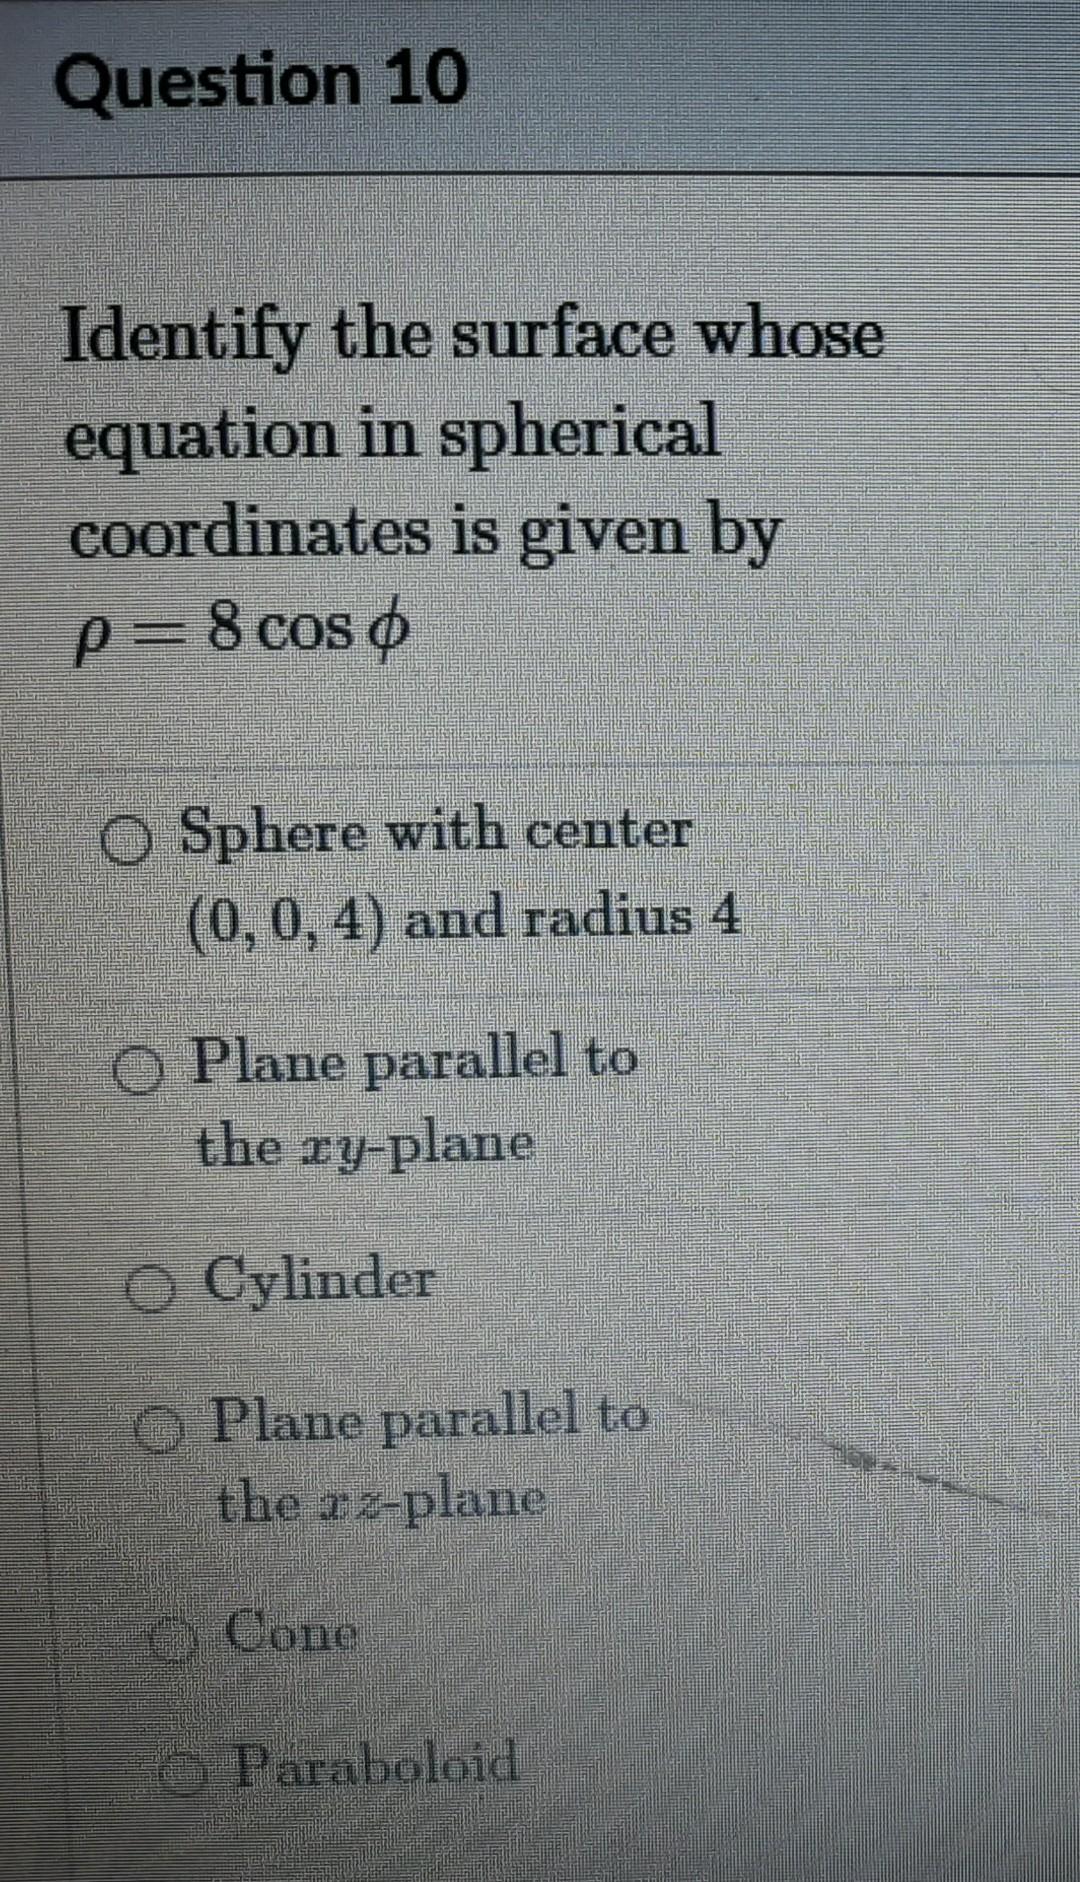 Question 10 Identify The Surface Whose Equation In Spherical Coordinates Is Given By P 8 Cos O O Sphere With Center 0 1